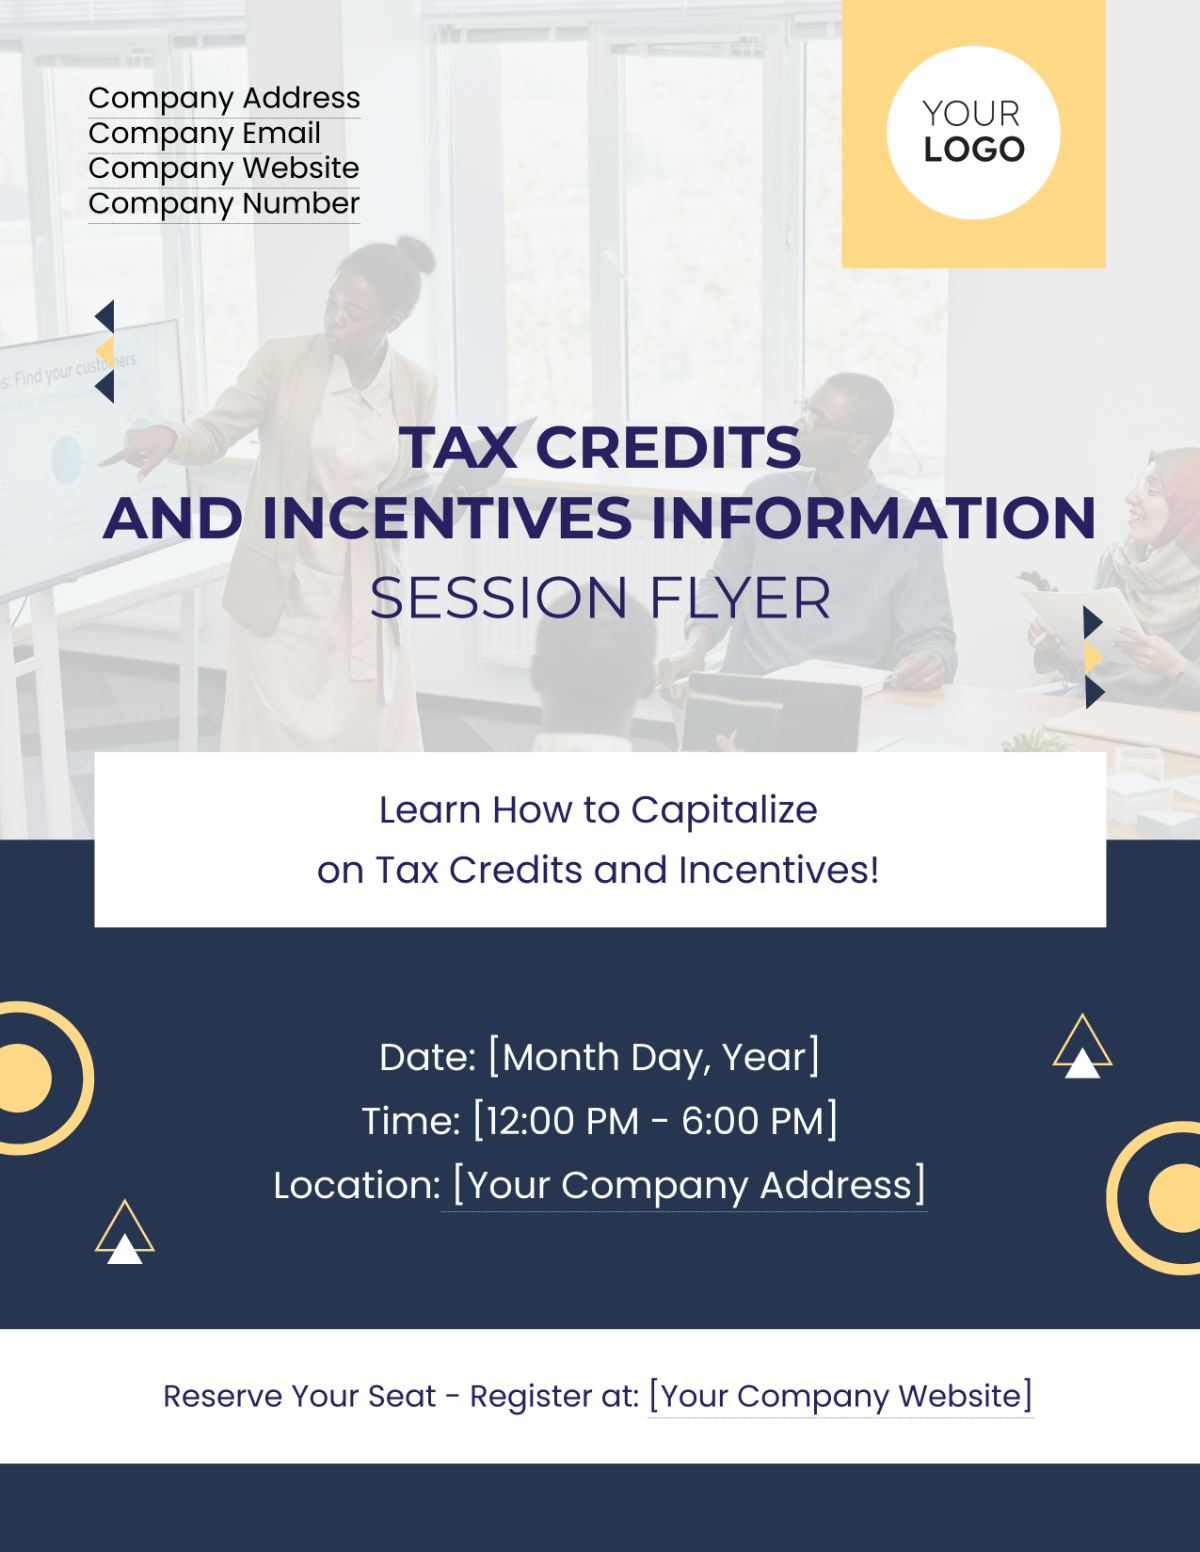 Tax Credits and Incentives Information Session Flyer